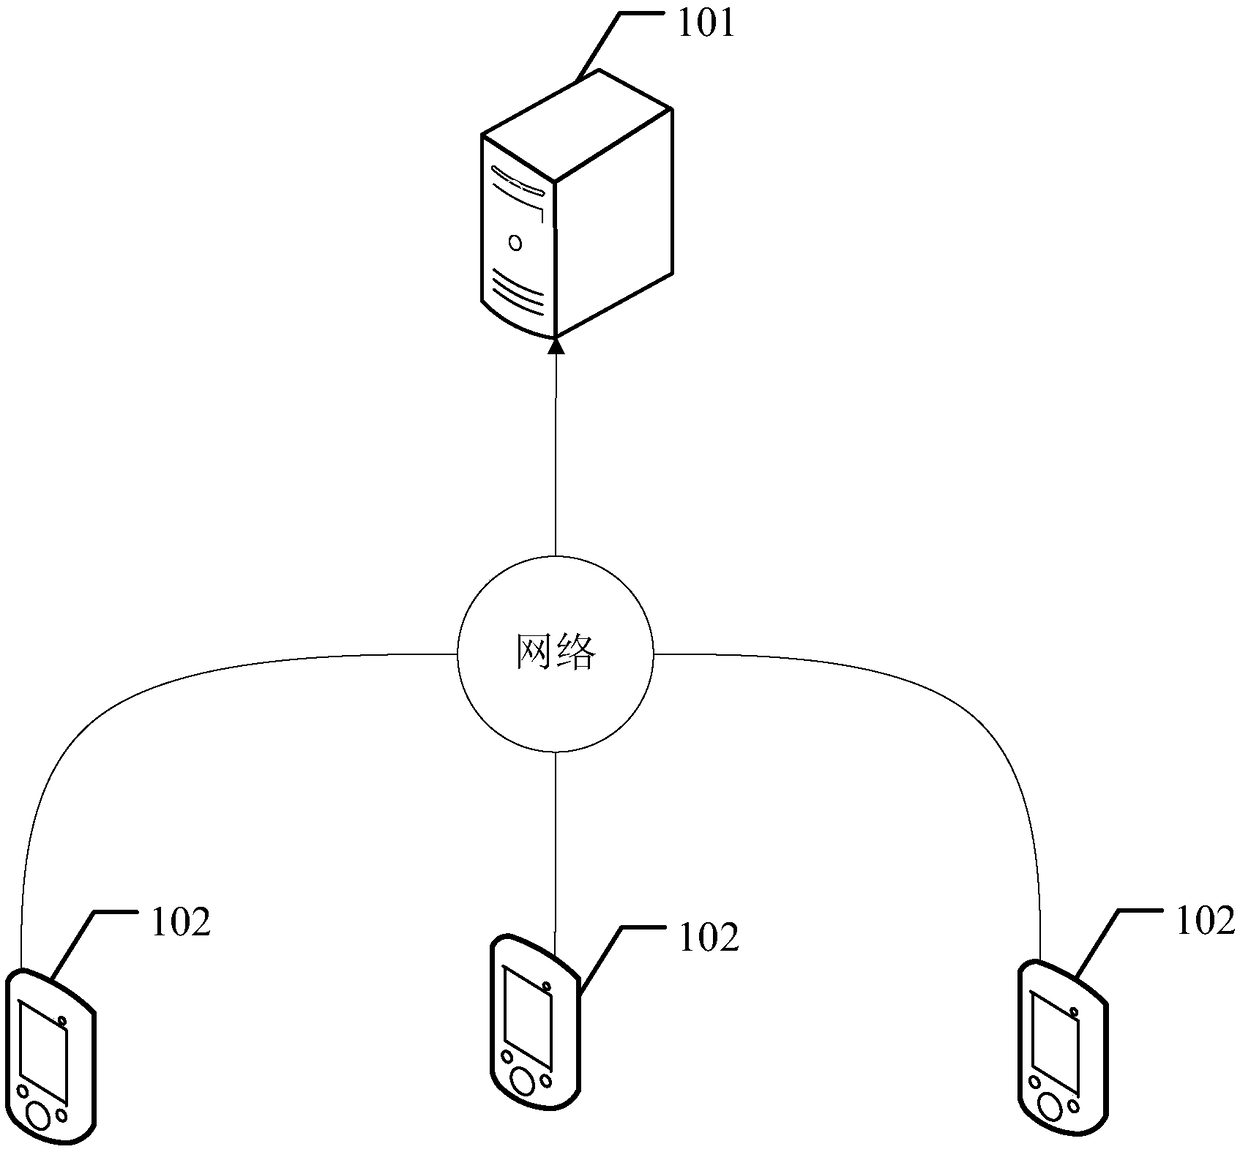 POI (Point Of Interest) offline method and related equipment